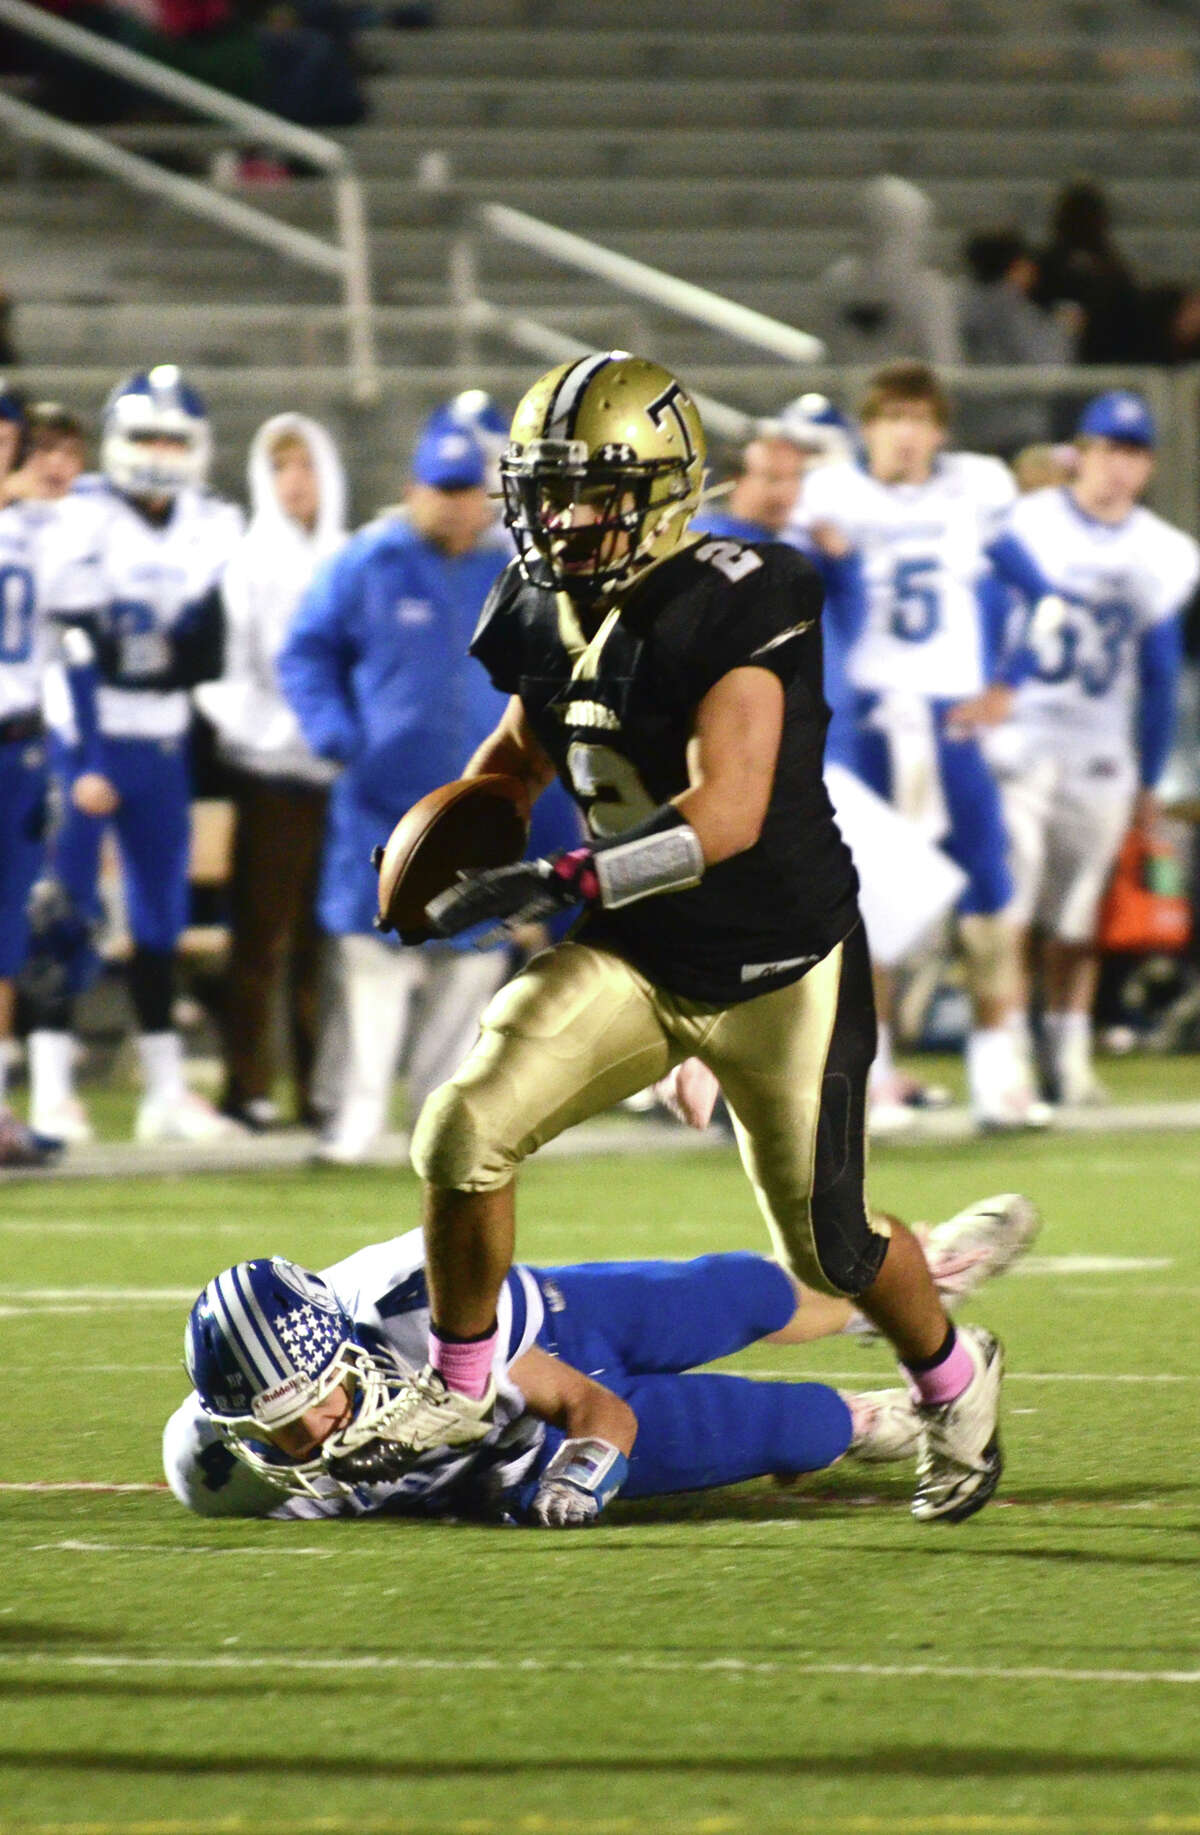 Trumbull's Ryan Pearson (2) carries the ball, stepping over Darien defender Jackson Whiting (4), during the football game against Darien at Trumbull High School on Friday, Oct. 12, 2012.